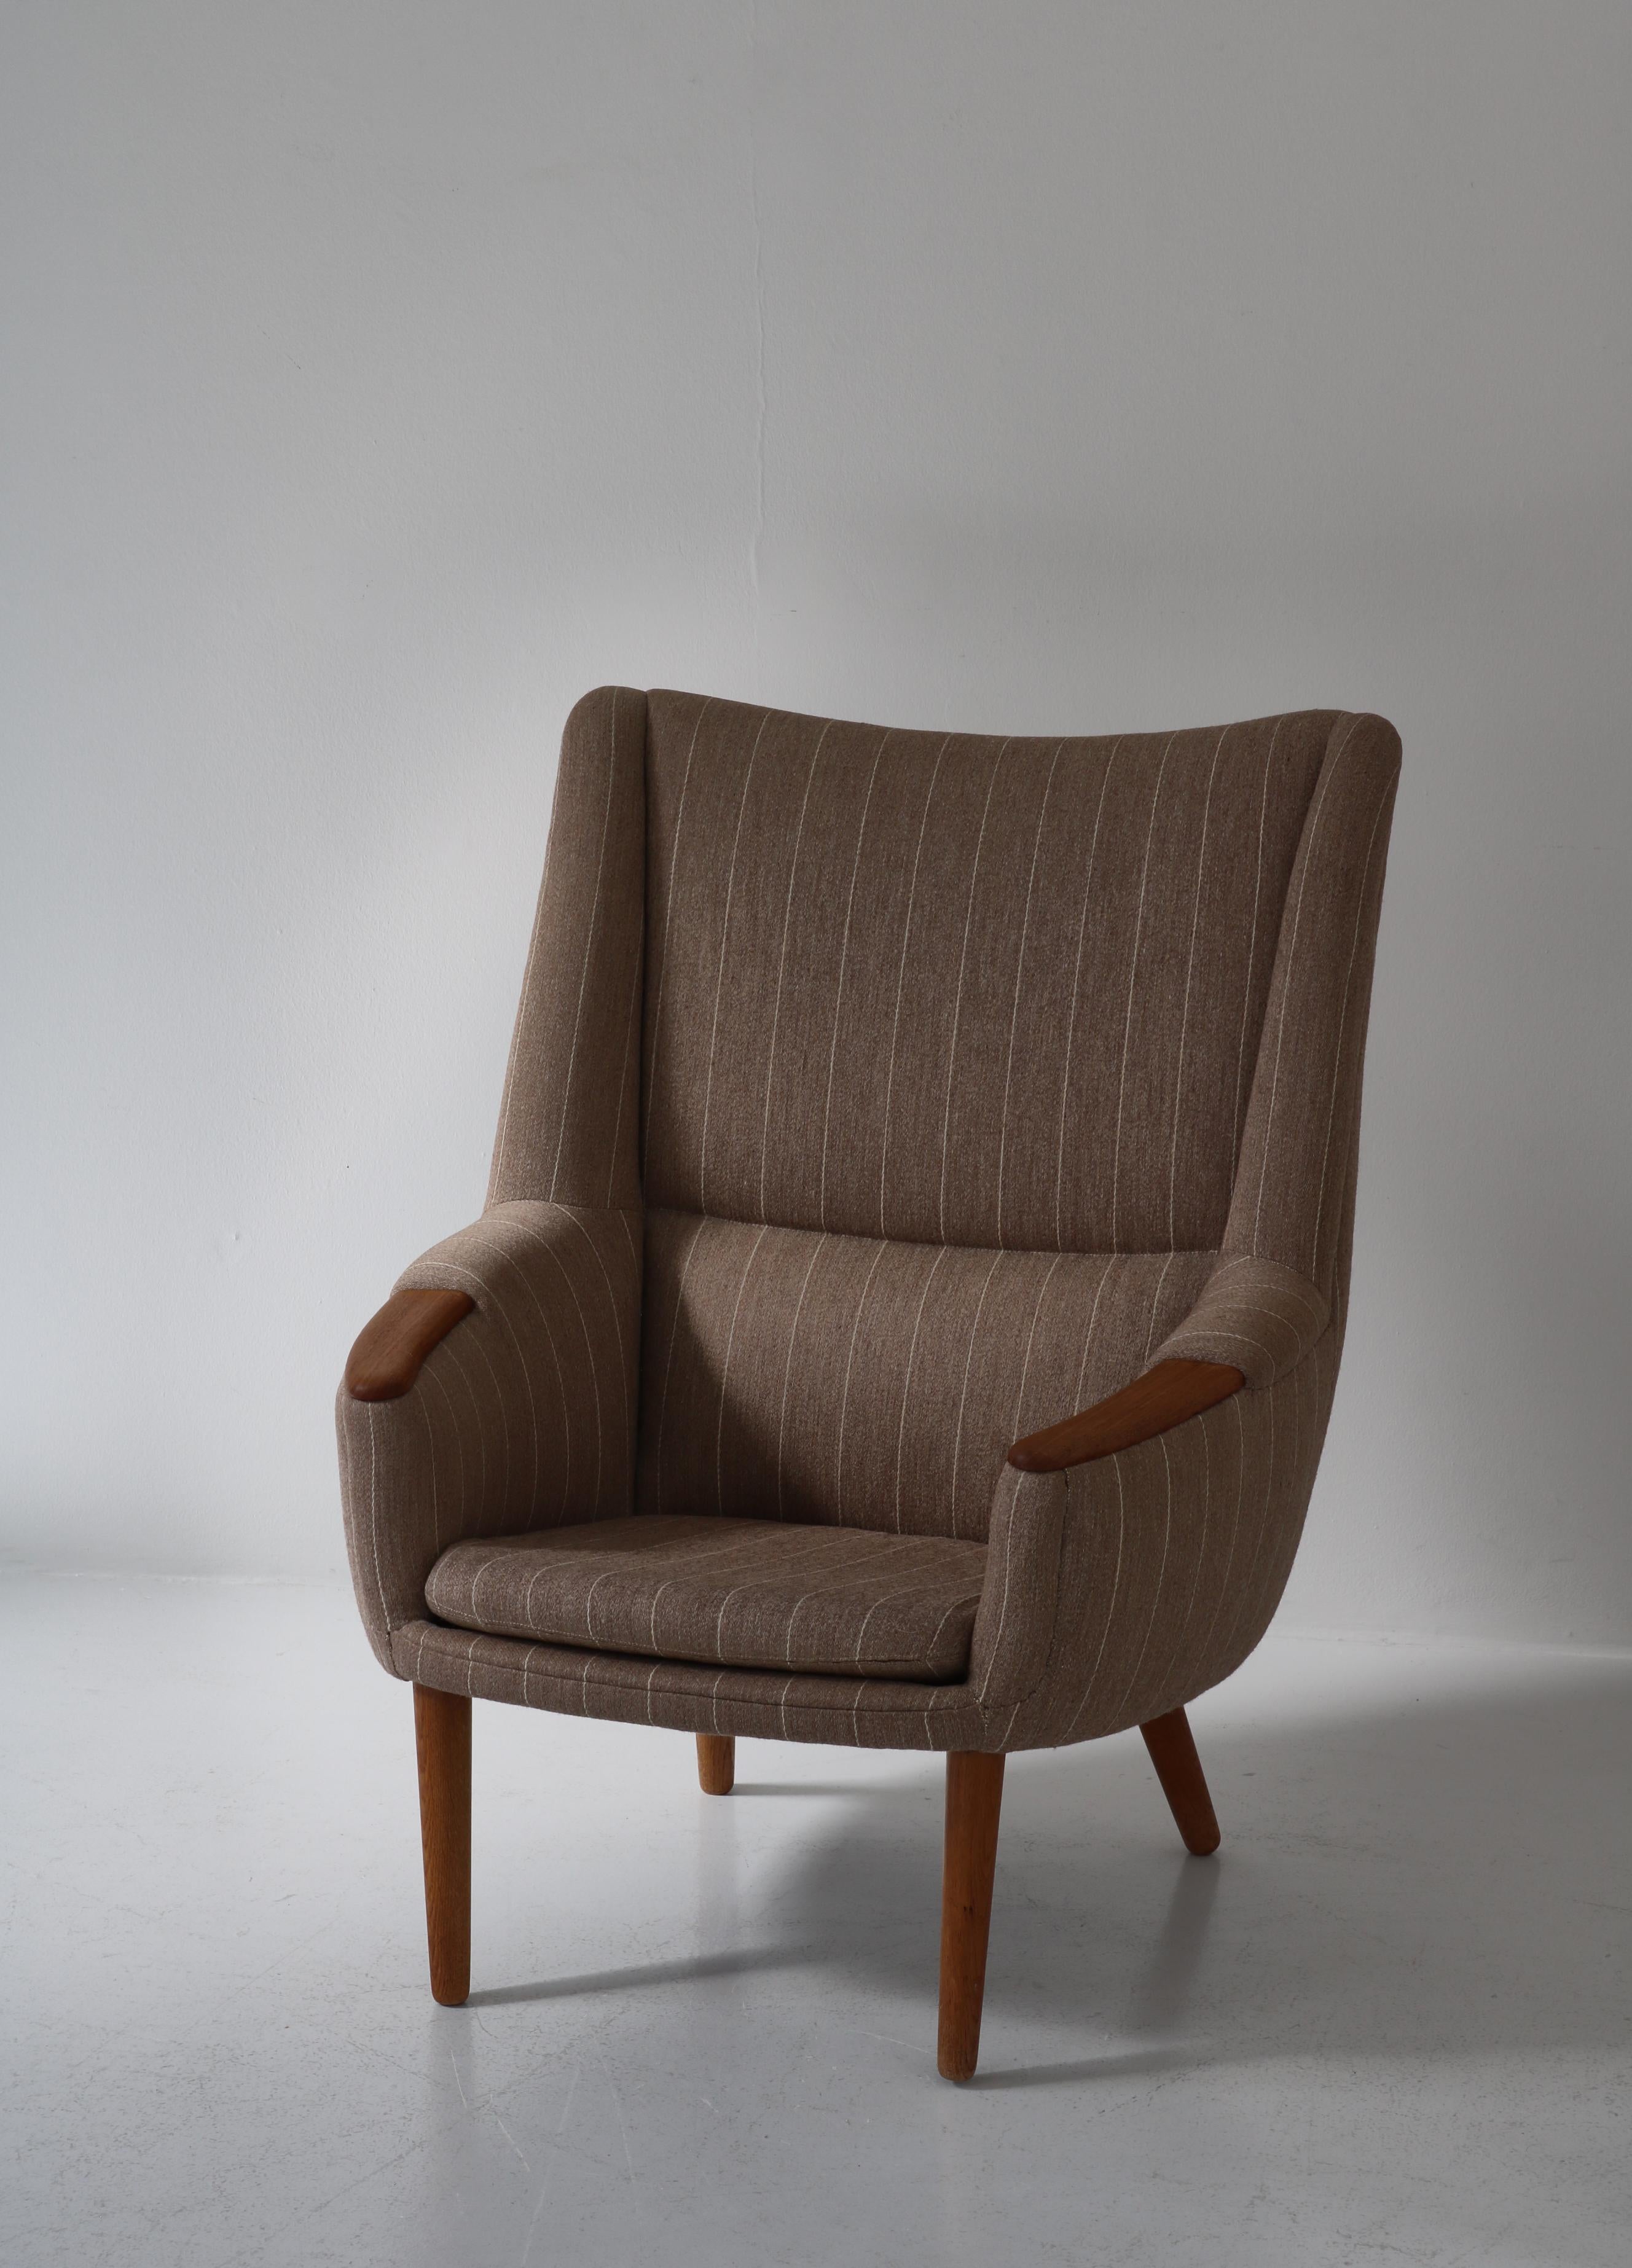 Beautiful vintage highback lounge chair from 1958 by Danish designer Kurt Østervig. The chair is known as 